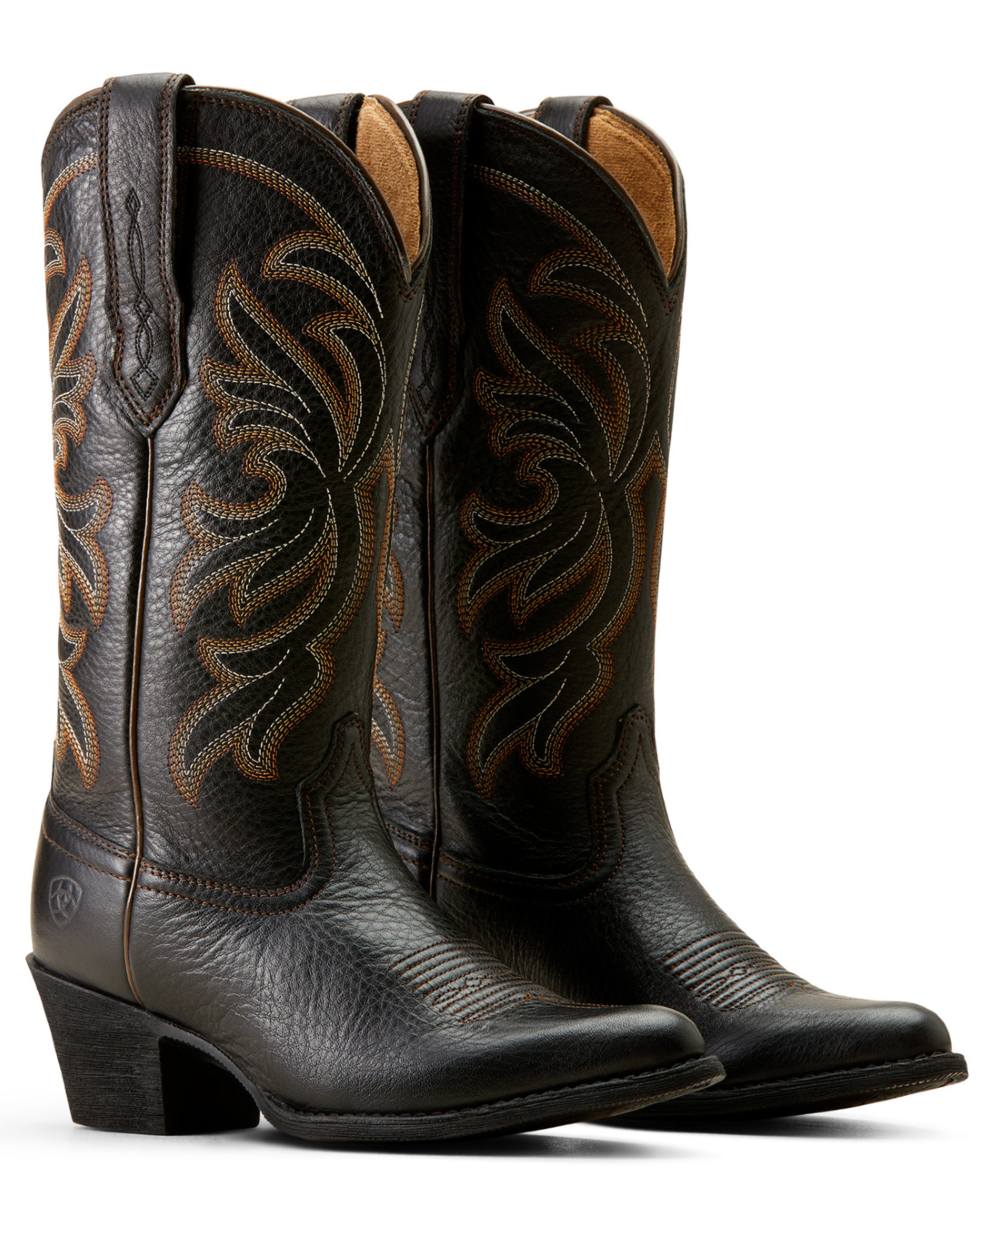 Black Deertan Coloured Ariat Womens Heritage J Toe Stretchfit Boots On A White Background 